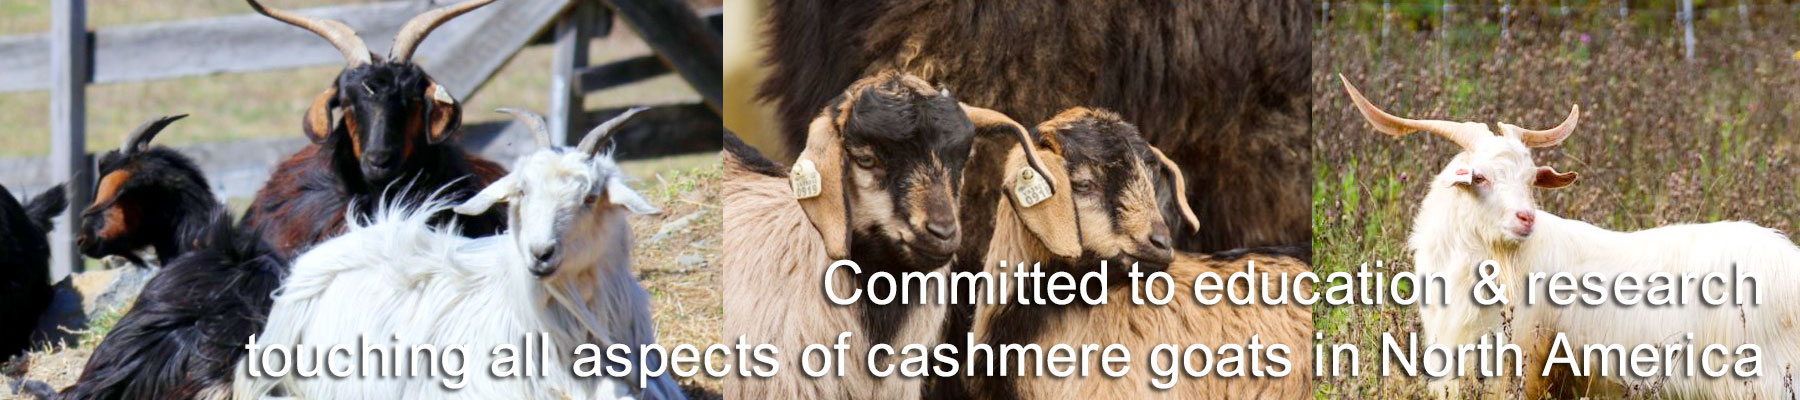 Committed to education and research touching all aspects of cashmere goats in North America